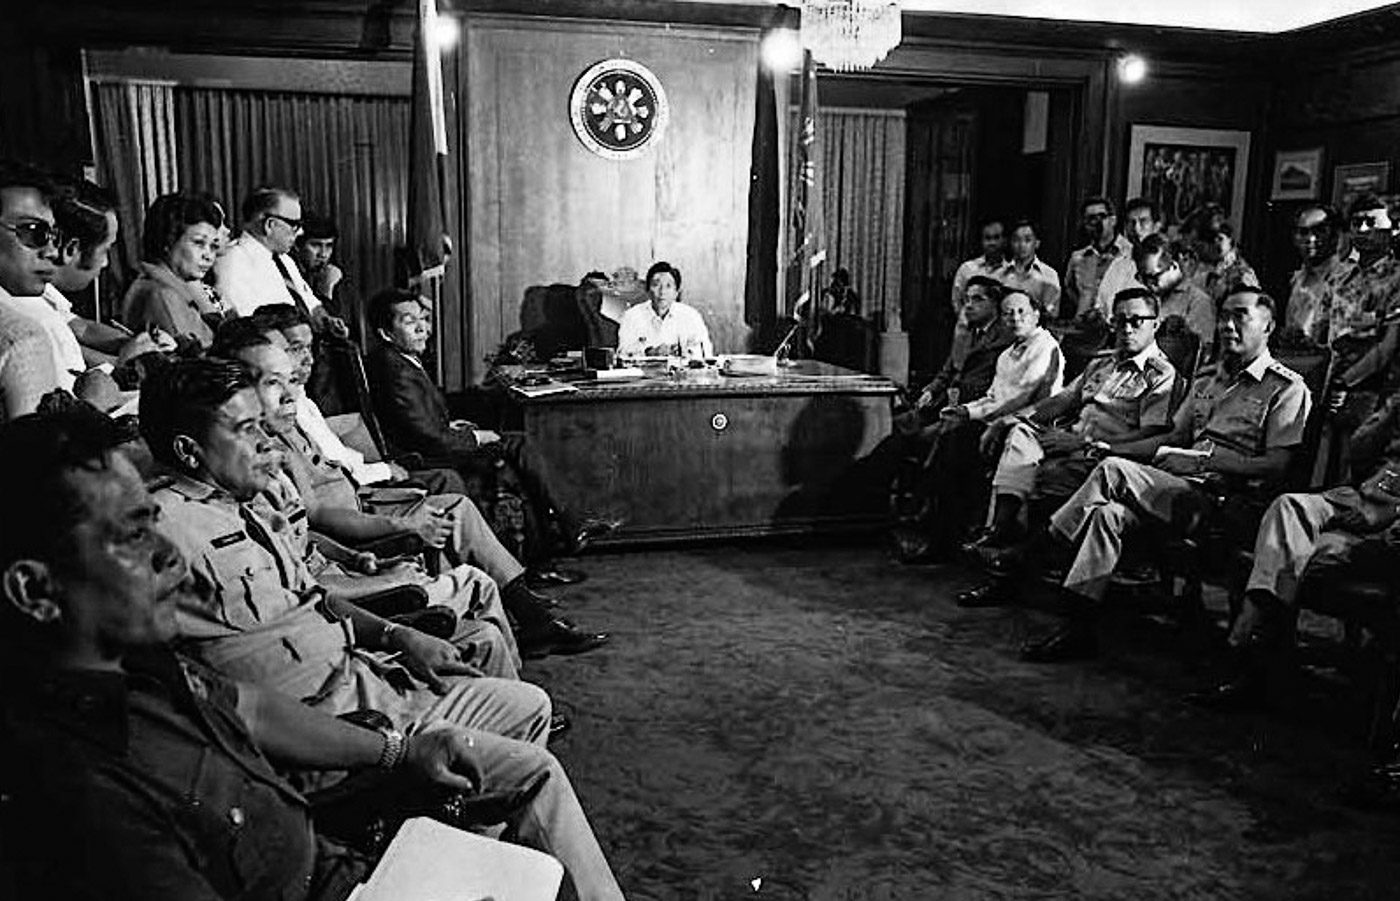 LOOK BACK: The Philippine Constabulary under Marcos